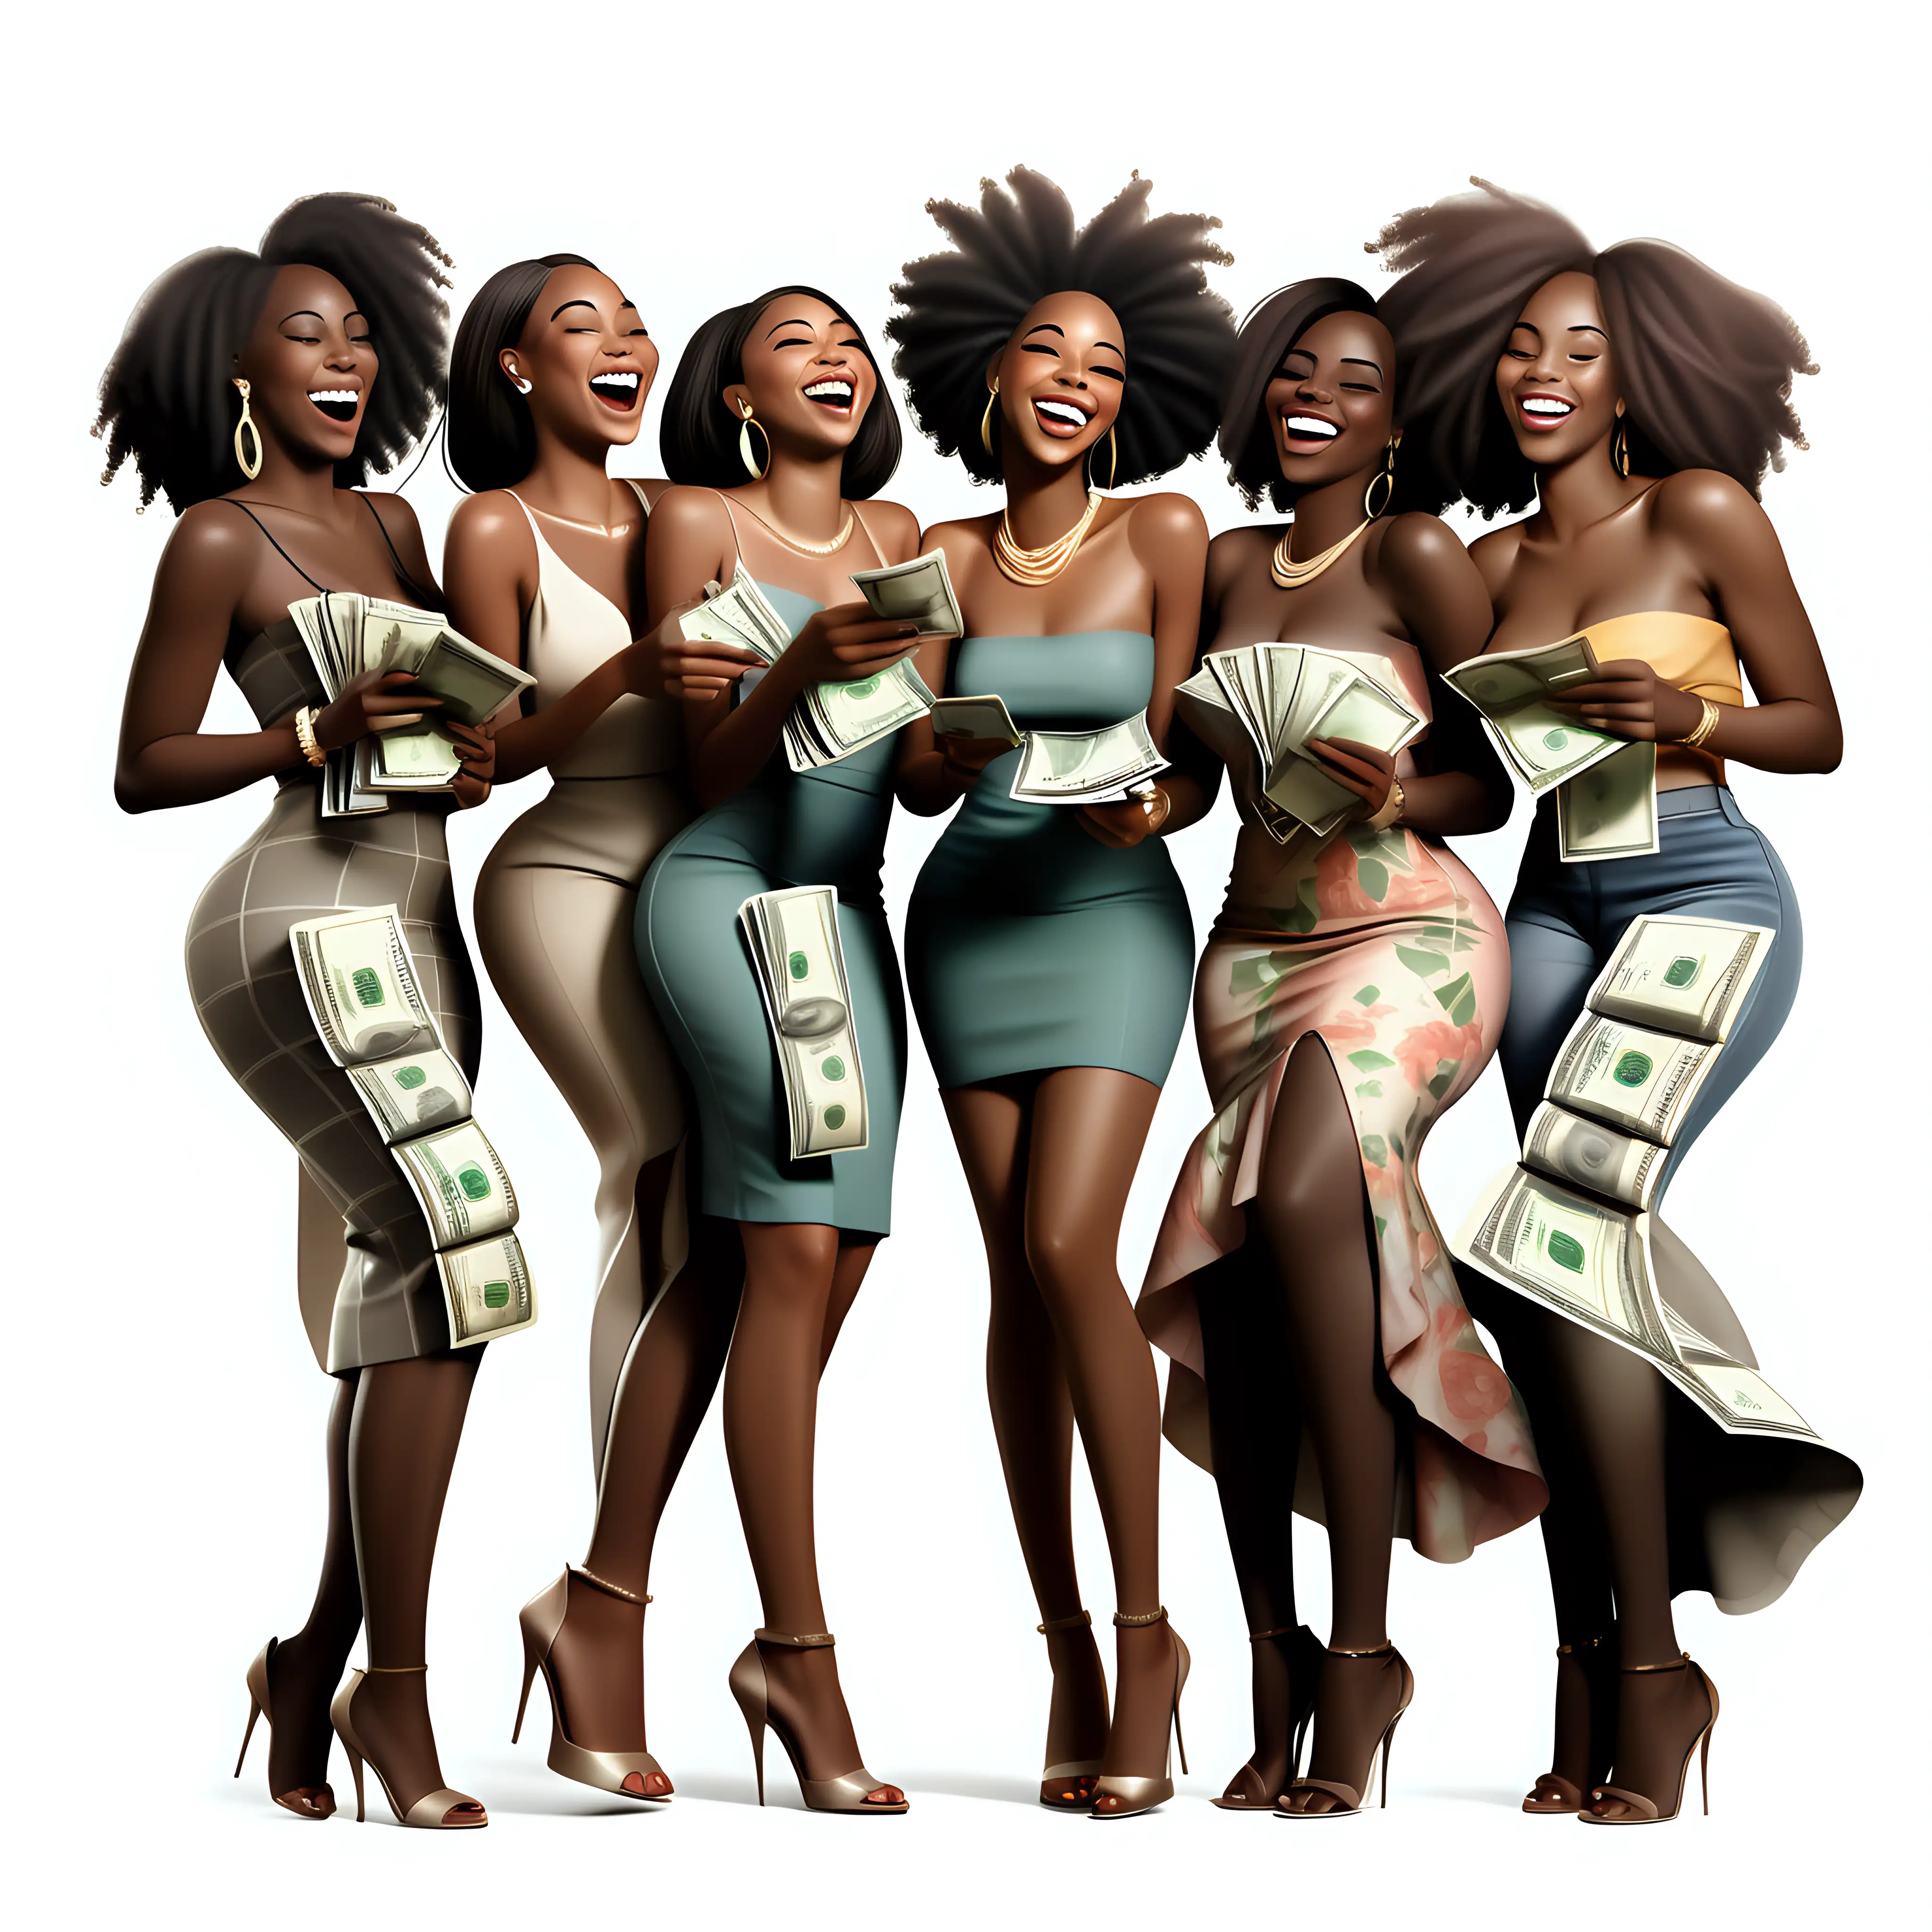 Beautiful Black Women Laughing with Money and Fancy Purses